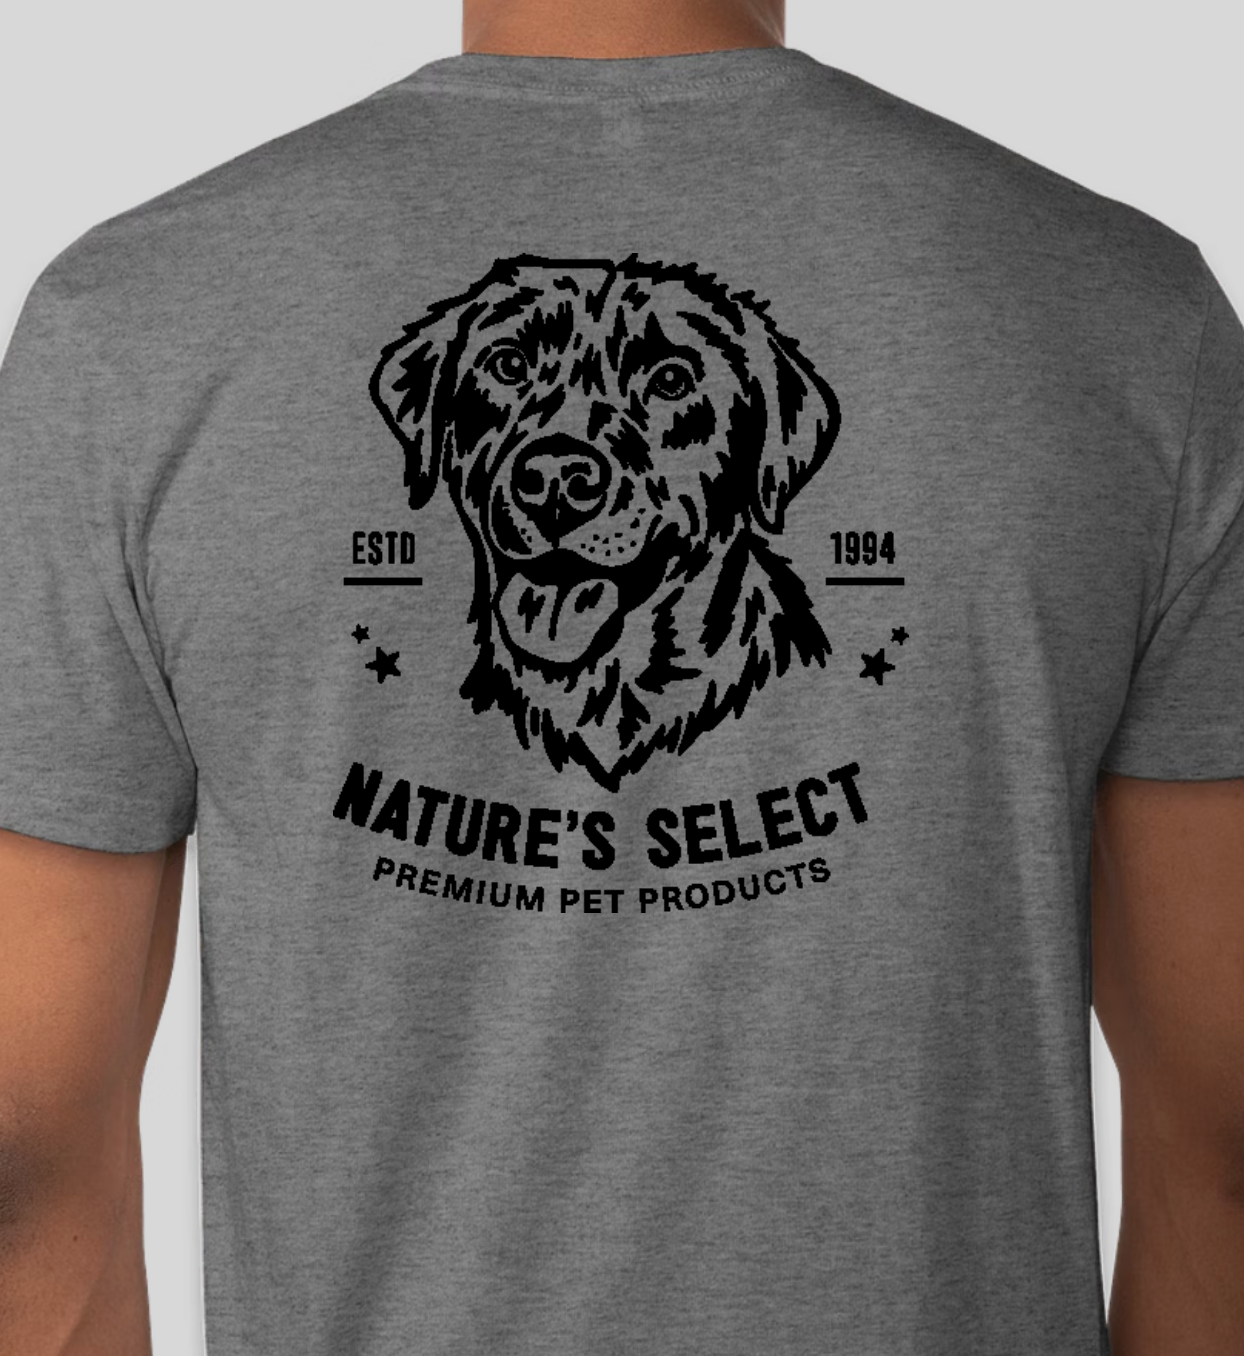 Nature's Select Tee